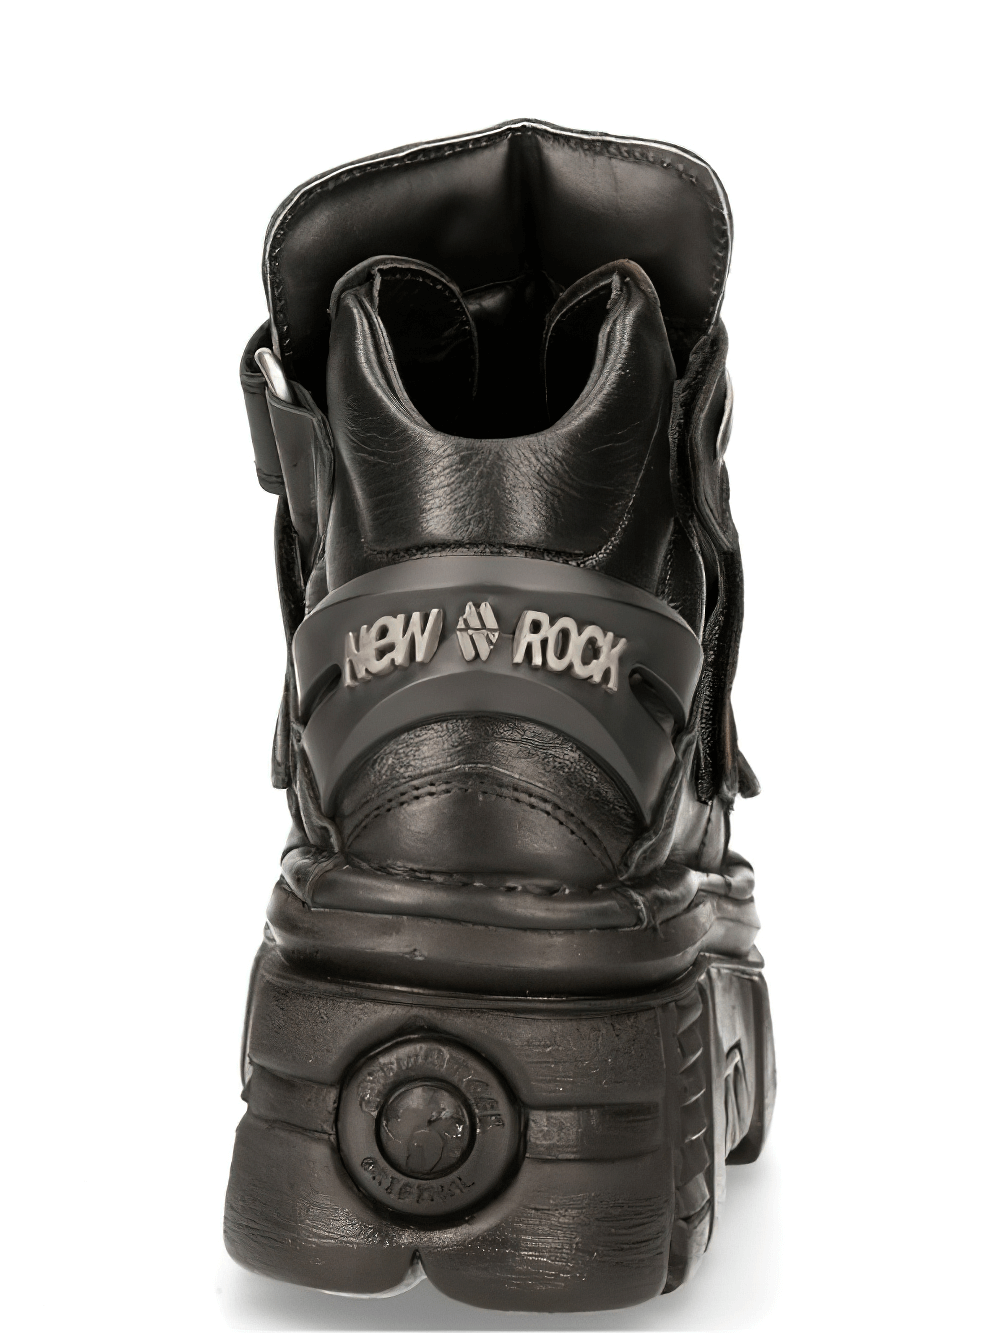 NEW ROCK Unisex Leather Ankle Boots with Metallic Details